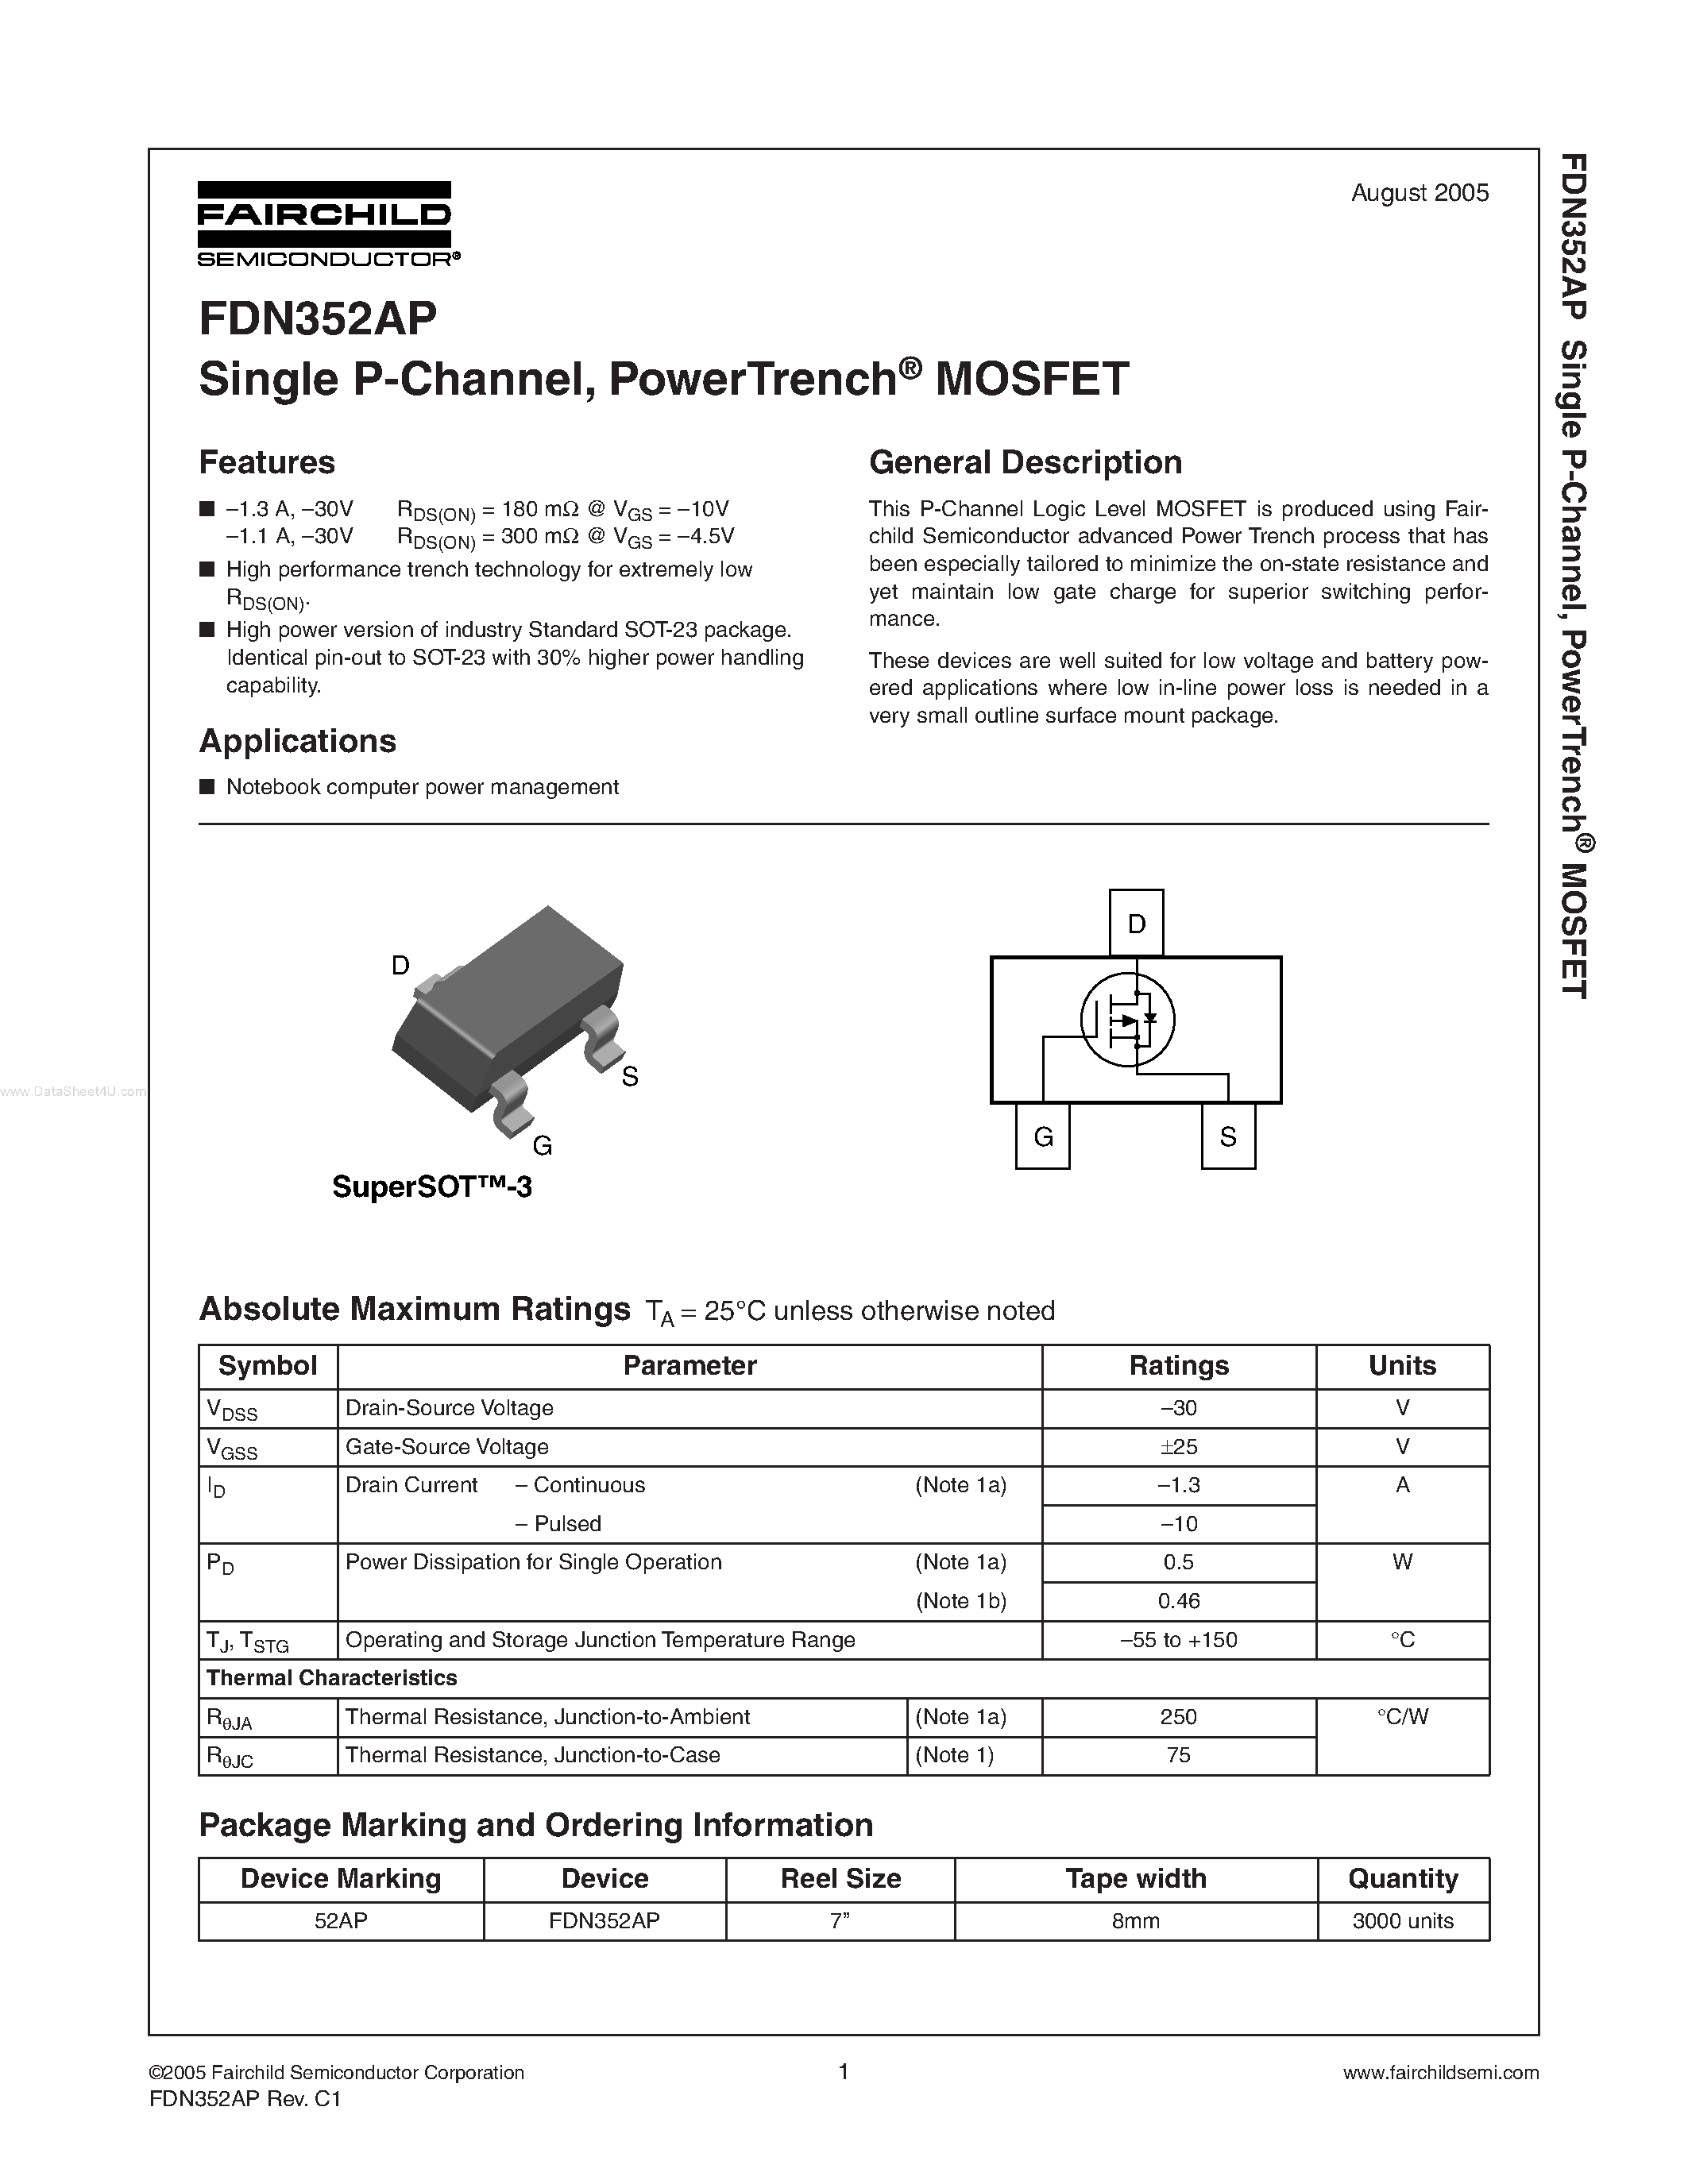 Datasheet FDN352AP - PowerTrench MOSFET page 1